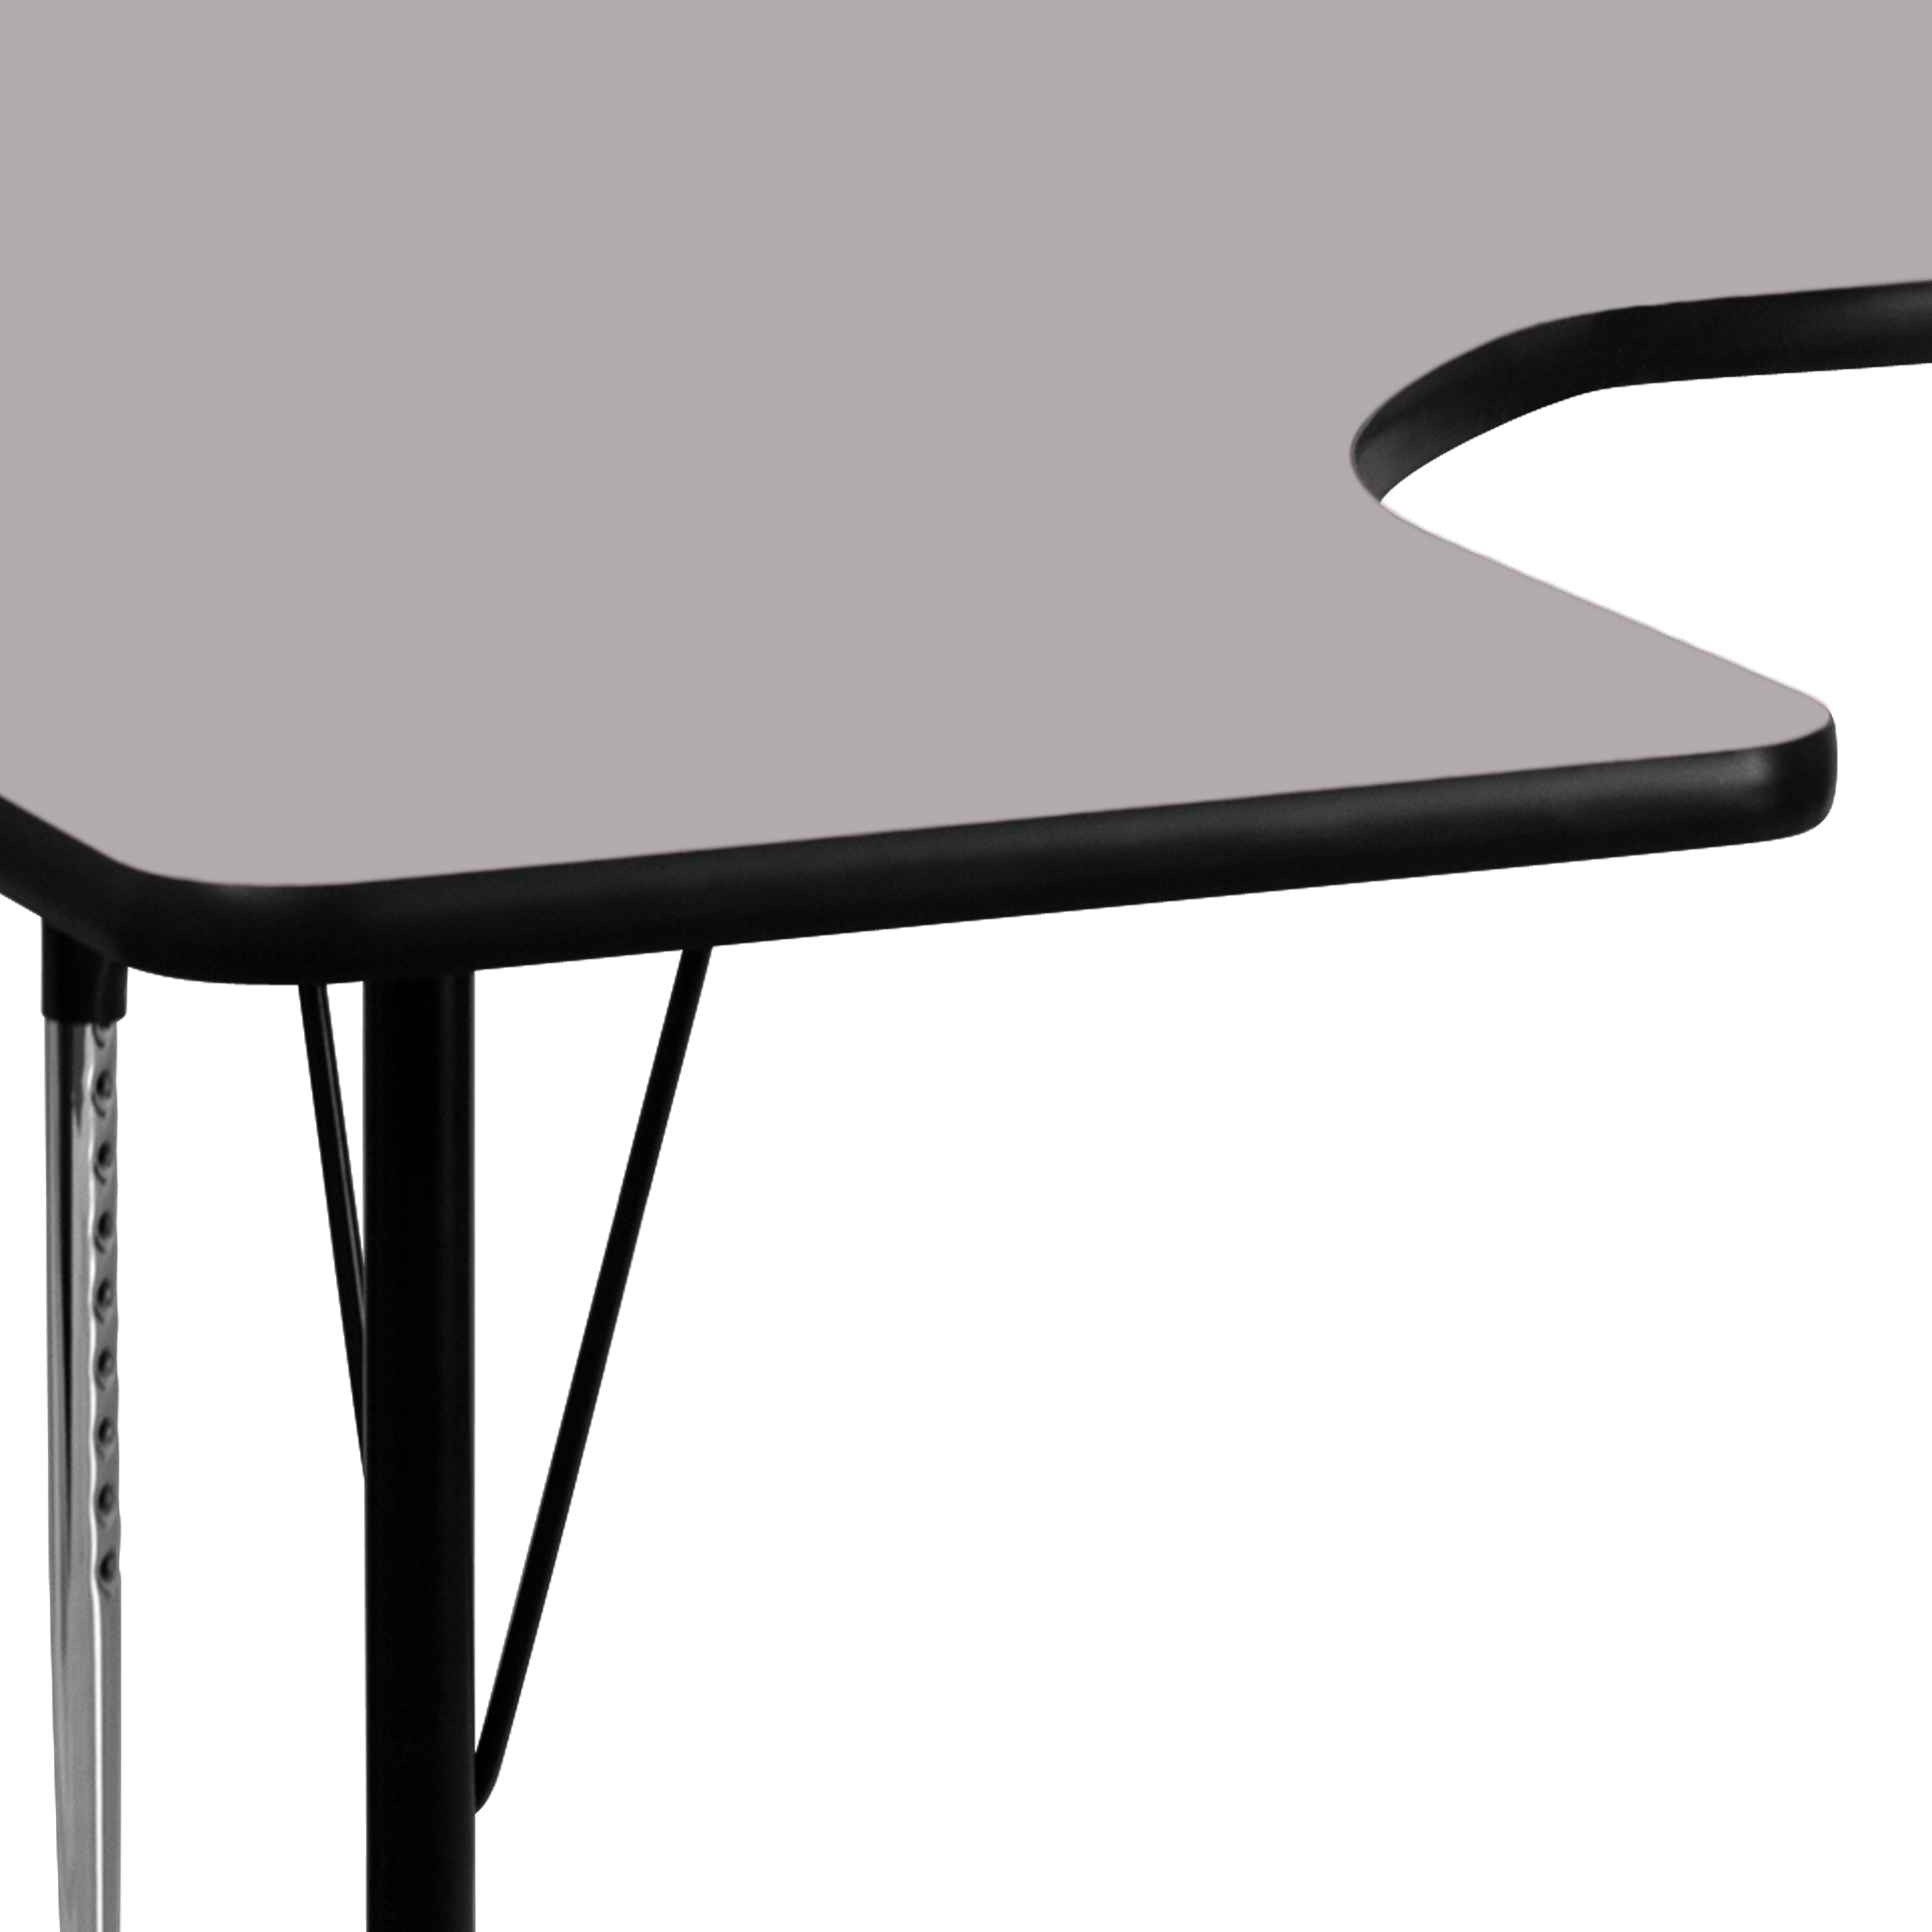 60''W x 66''L Horseshoe Thermal Laminate Activity Table - Standard Height Adjustable Legs-Horseshoe Activity Table-Flash Furniture-Wall2Wall Furnishings